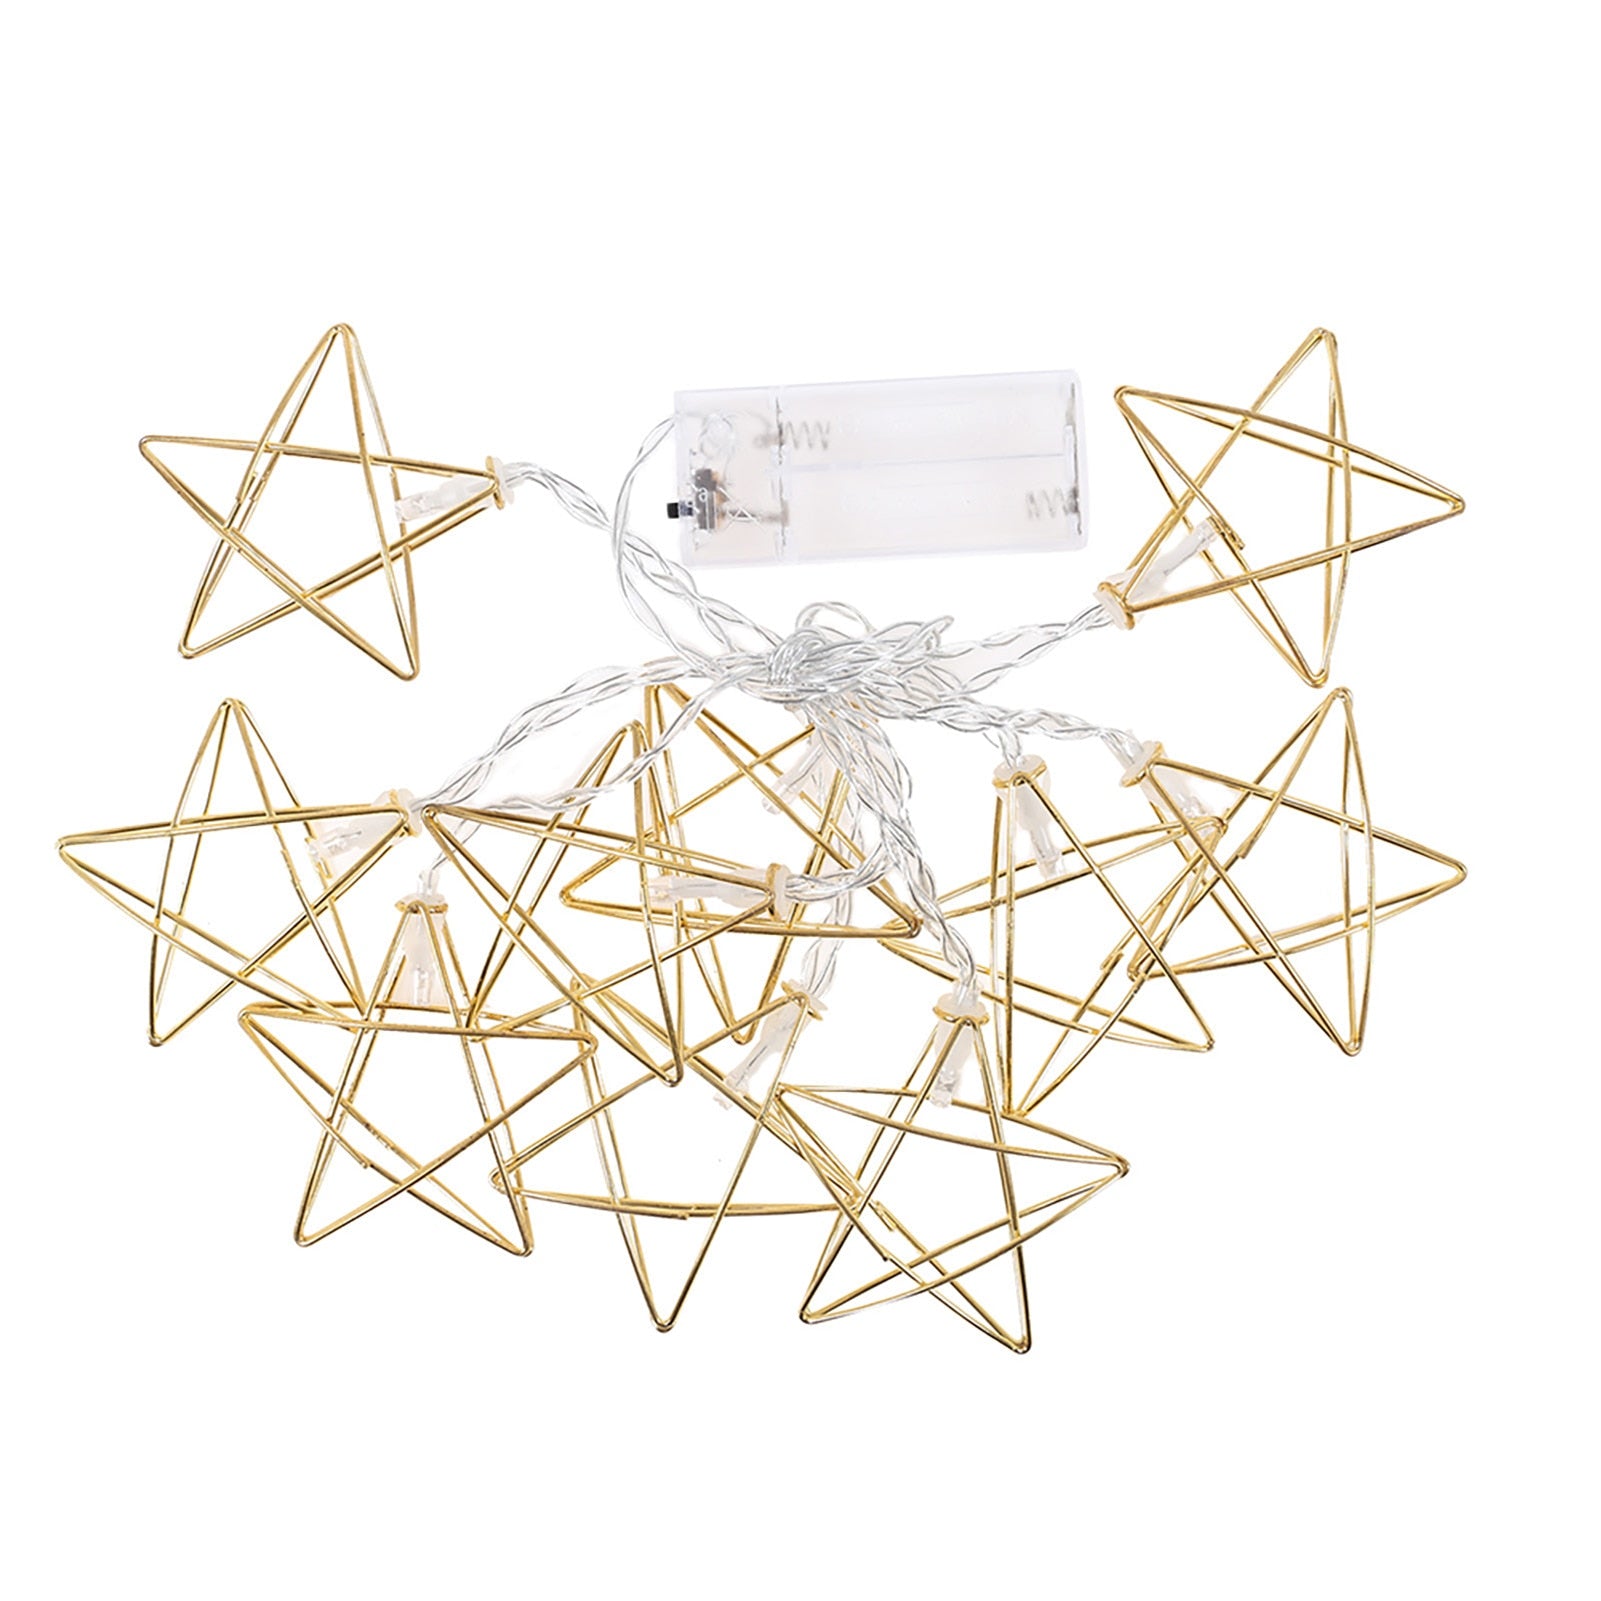 Merry Christmas 1.5M 10 LEDs Stars Fairy String Light LED Warm White for Home Daily Use DIY Decoration Gifts